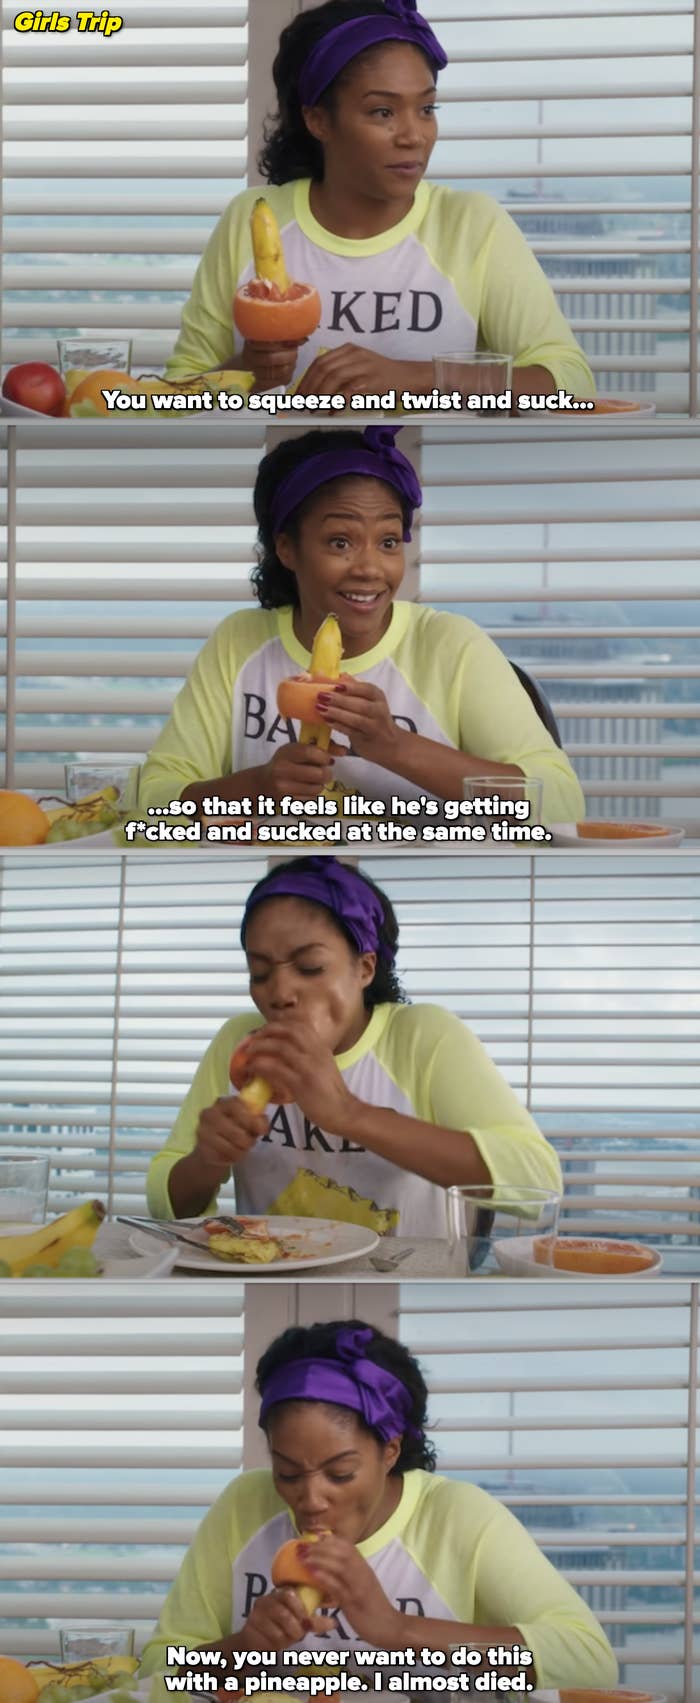 Tiffany Haddish pretending to give a blowjob with a banana and grape fruit in &quot;Girls Trip&quot;